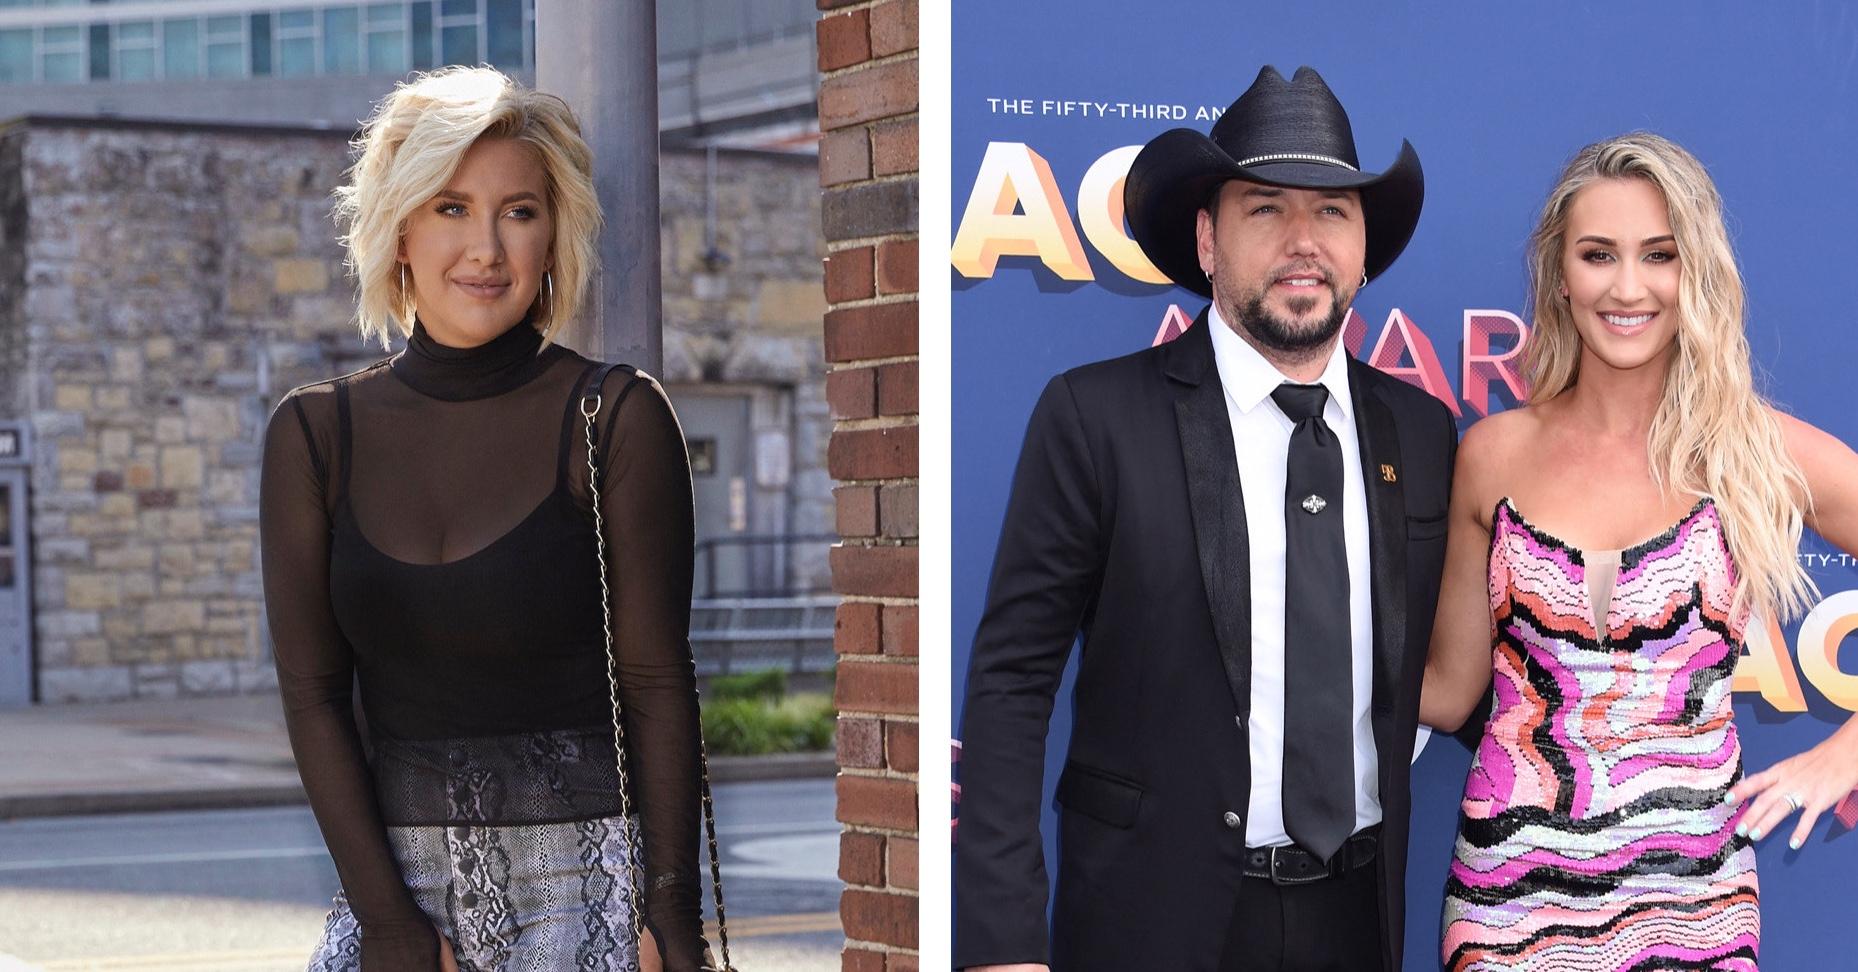 Jason Aldean Offered Savannah Chrisley His Home For Her Family